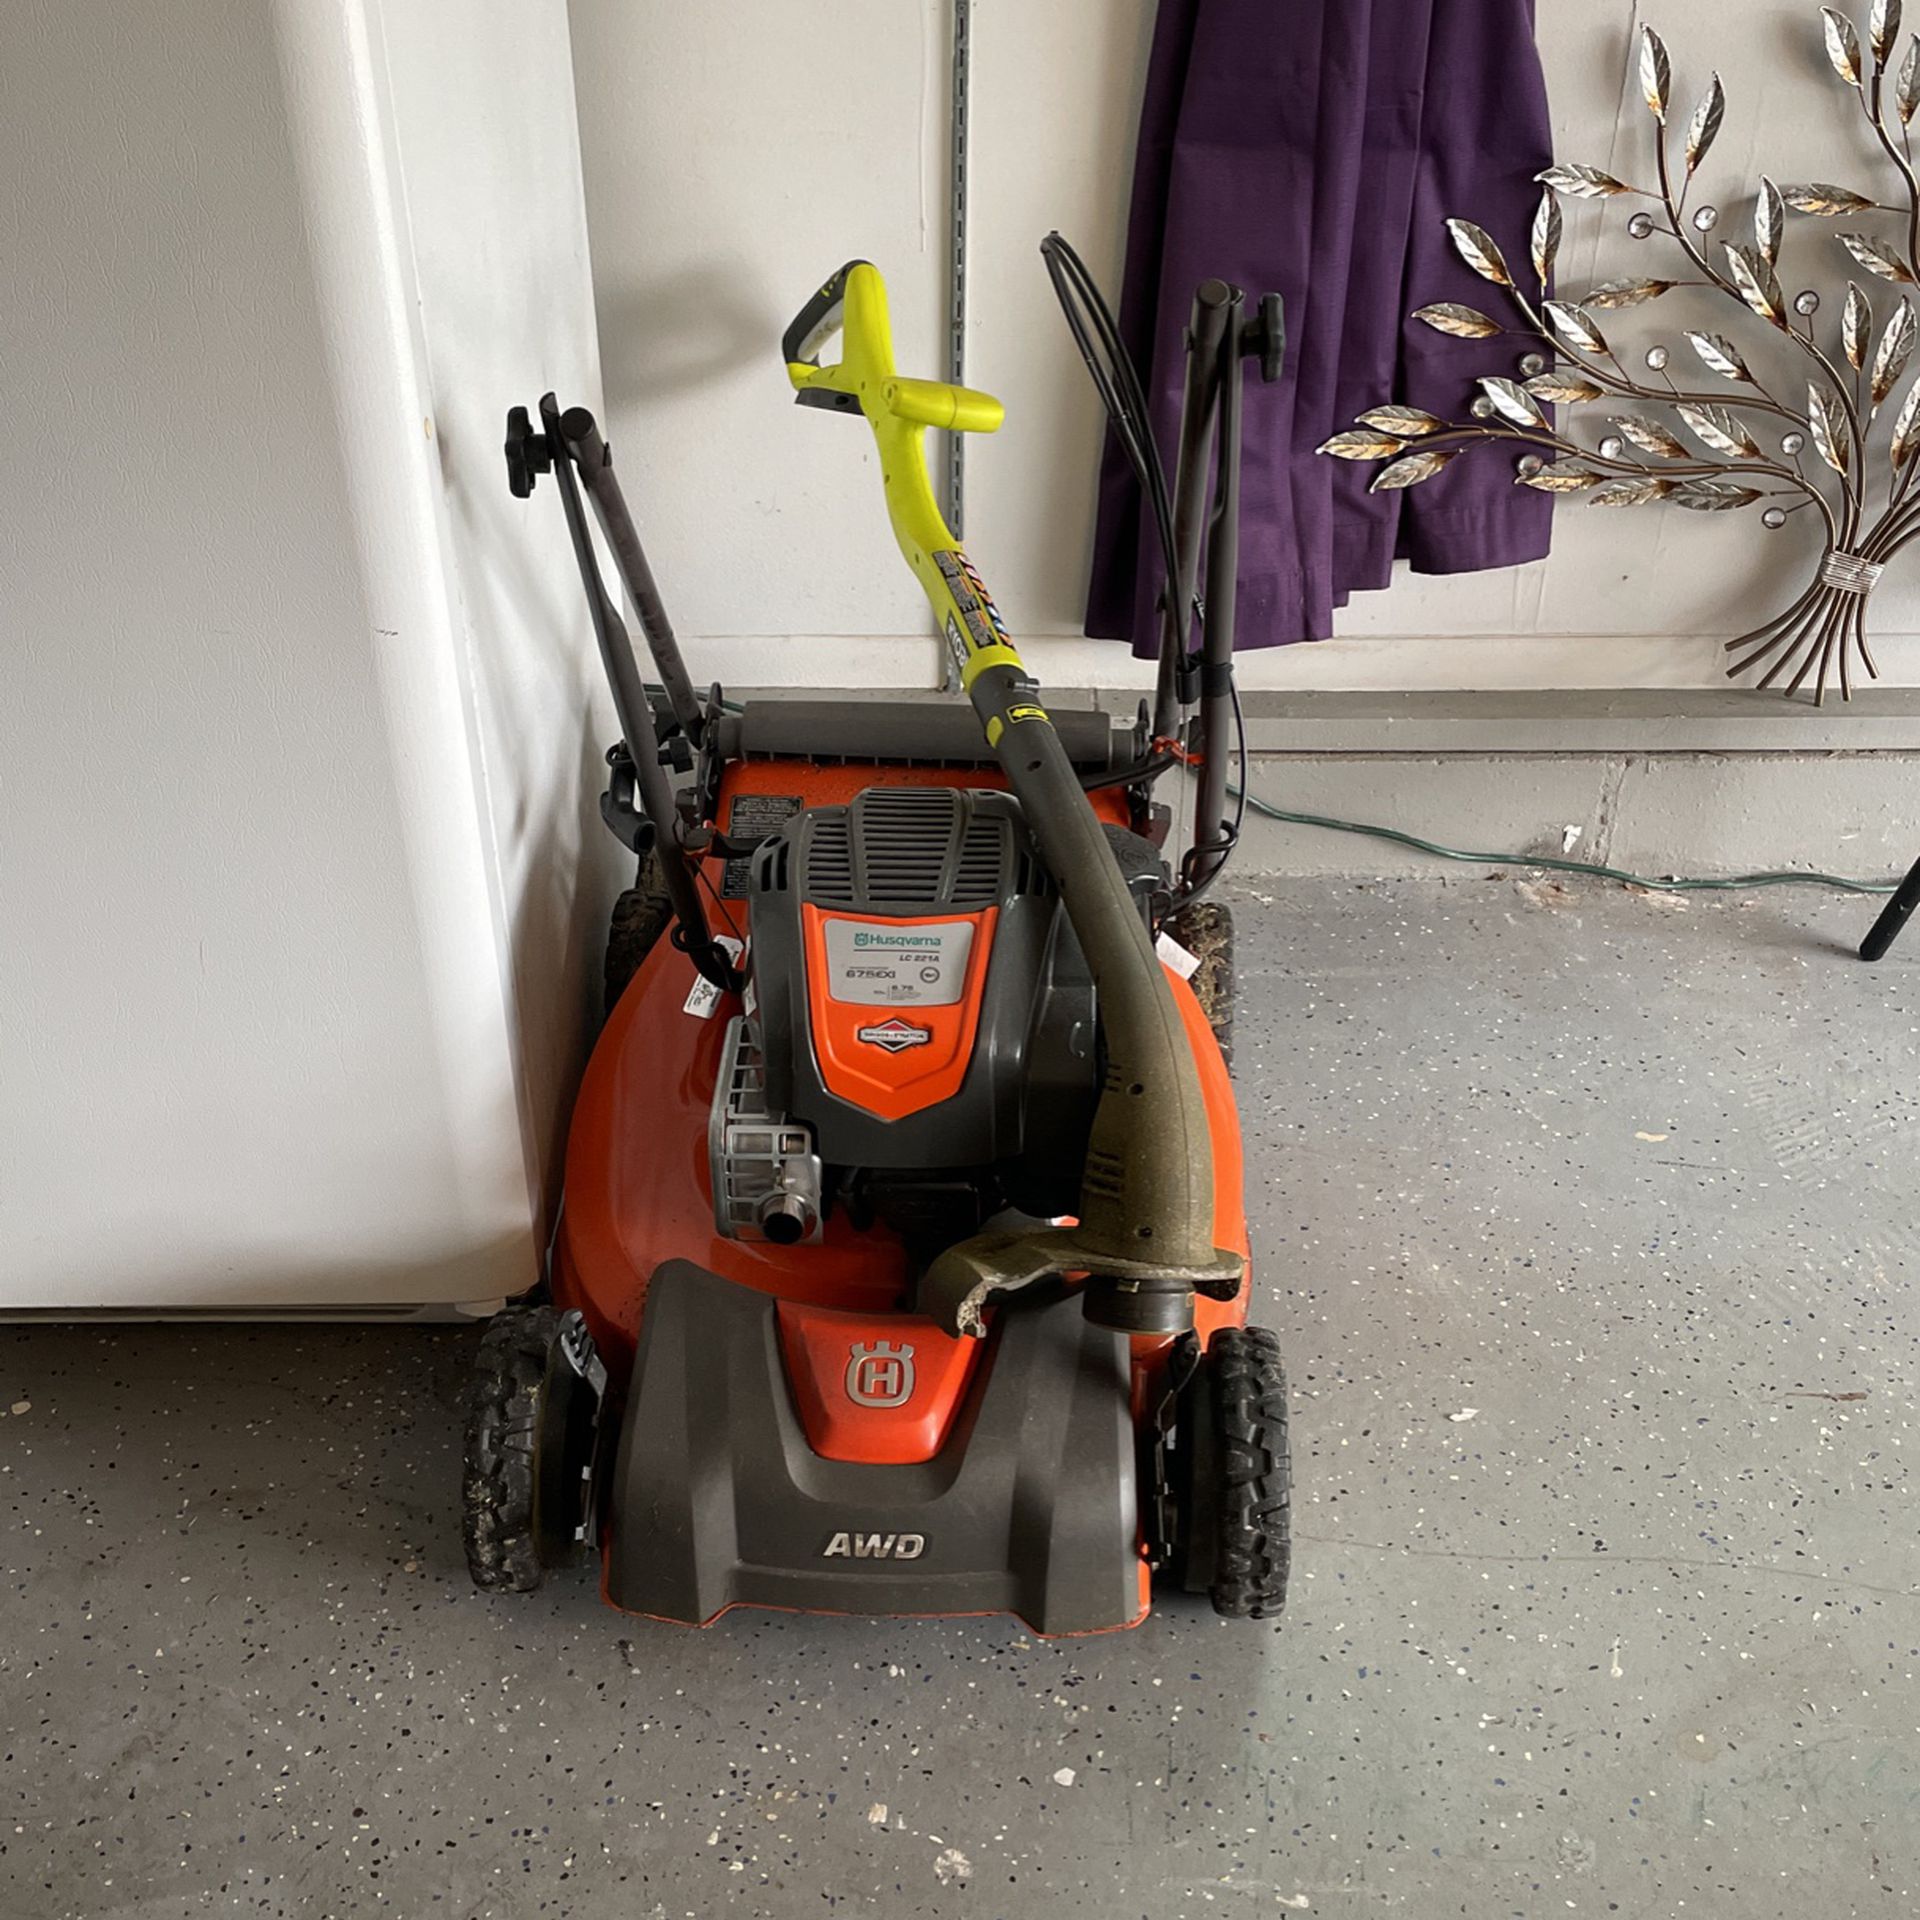 Honda Lawn Mower And Trimmer 